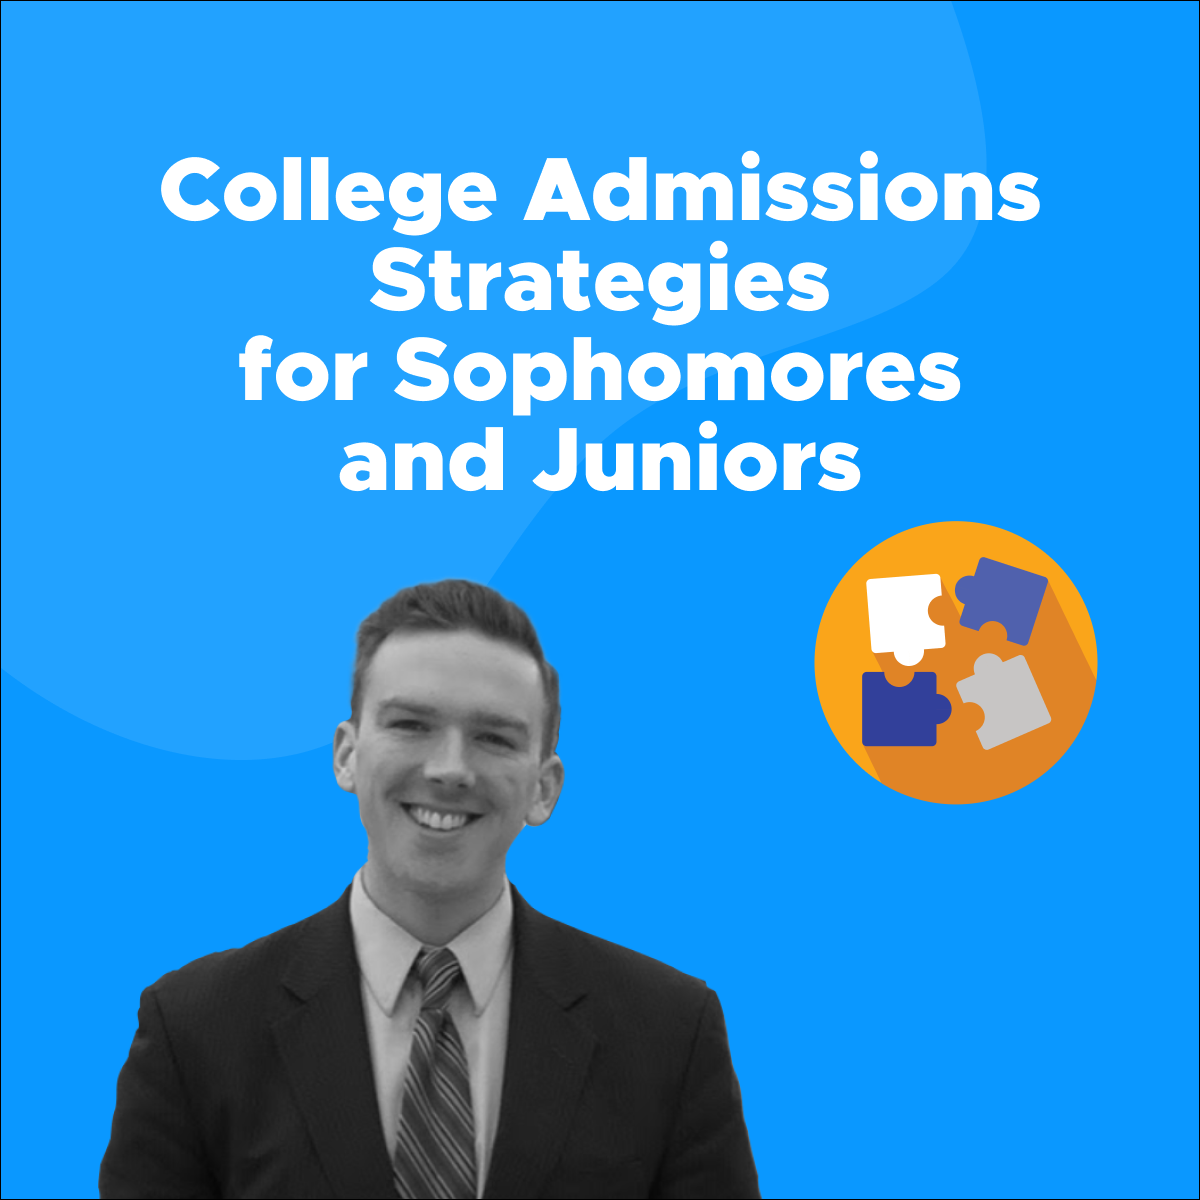 College Admissions Strategies for Sophomores and Juniors